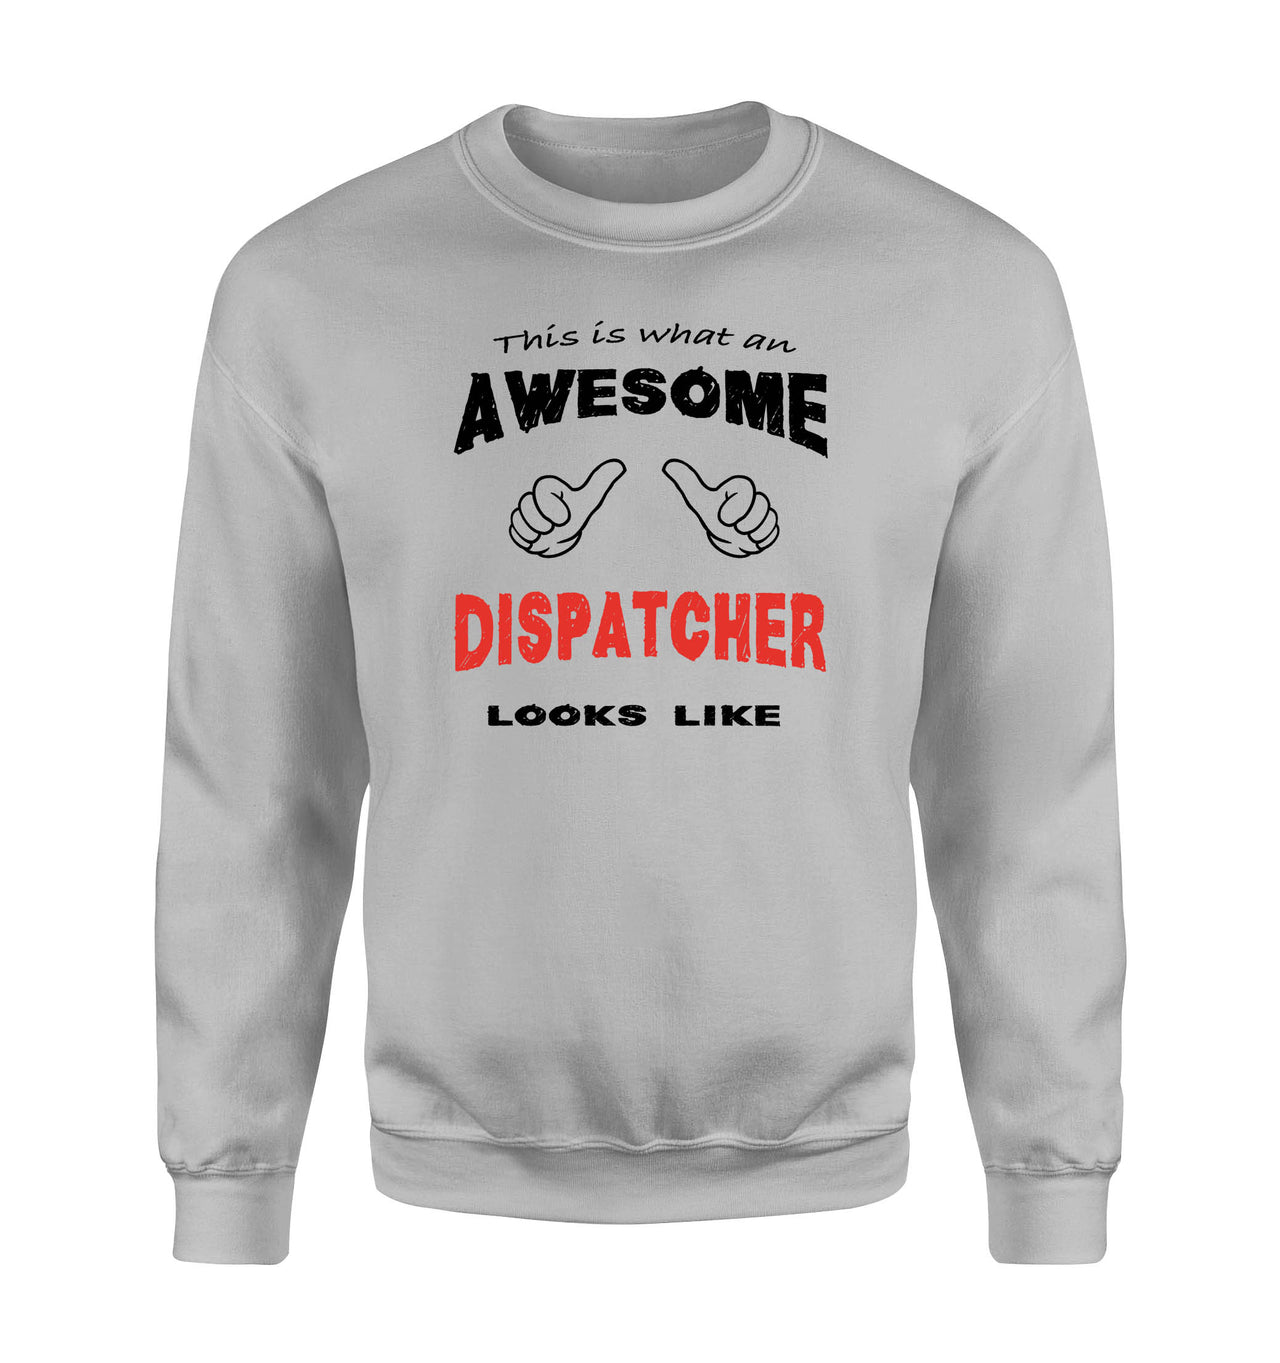 This is What an Awesome Dispatcher Looks Like Sweatshirts